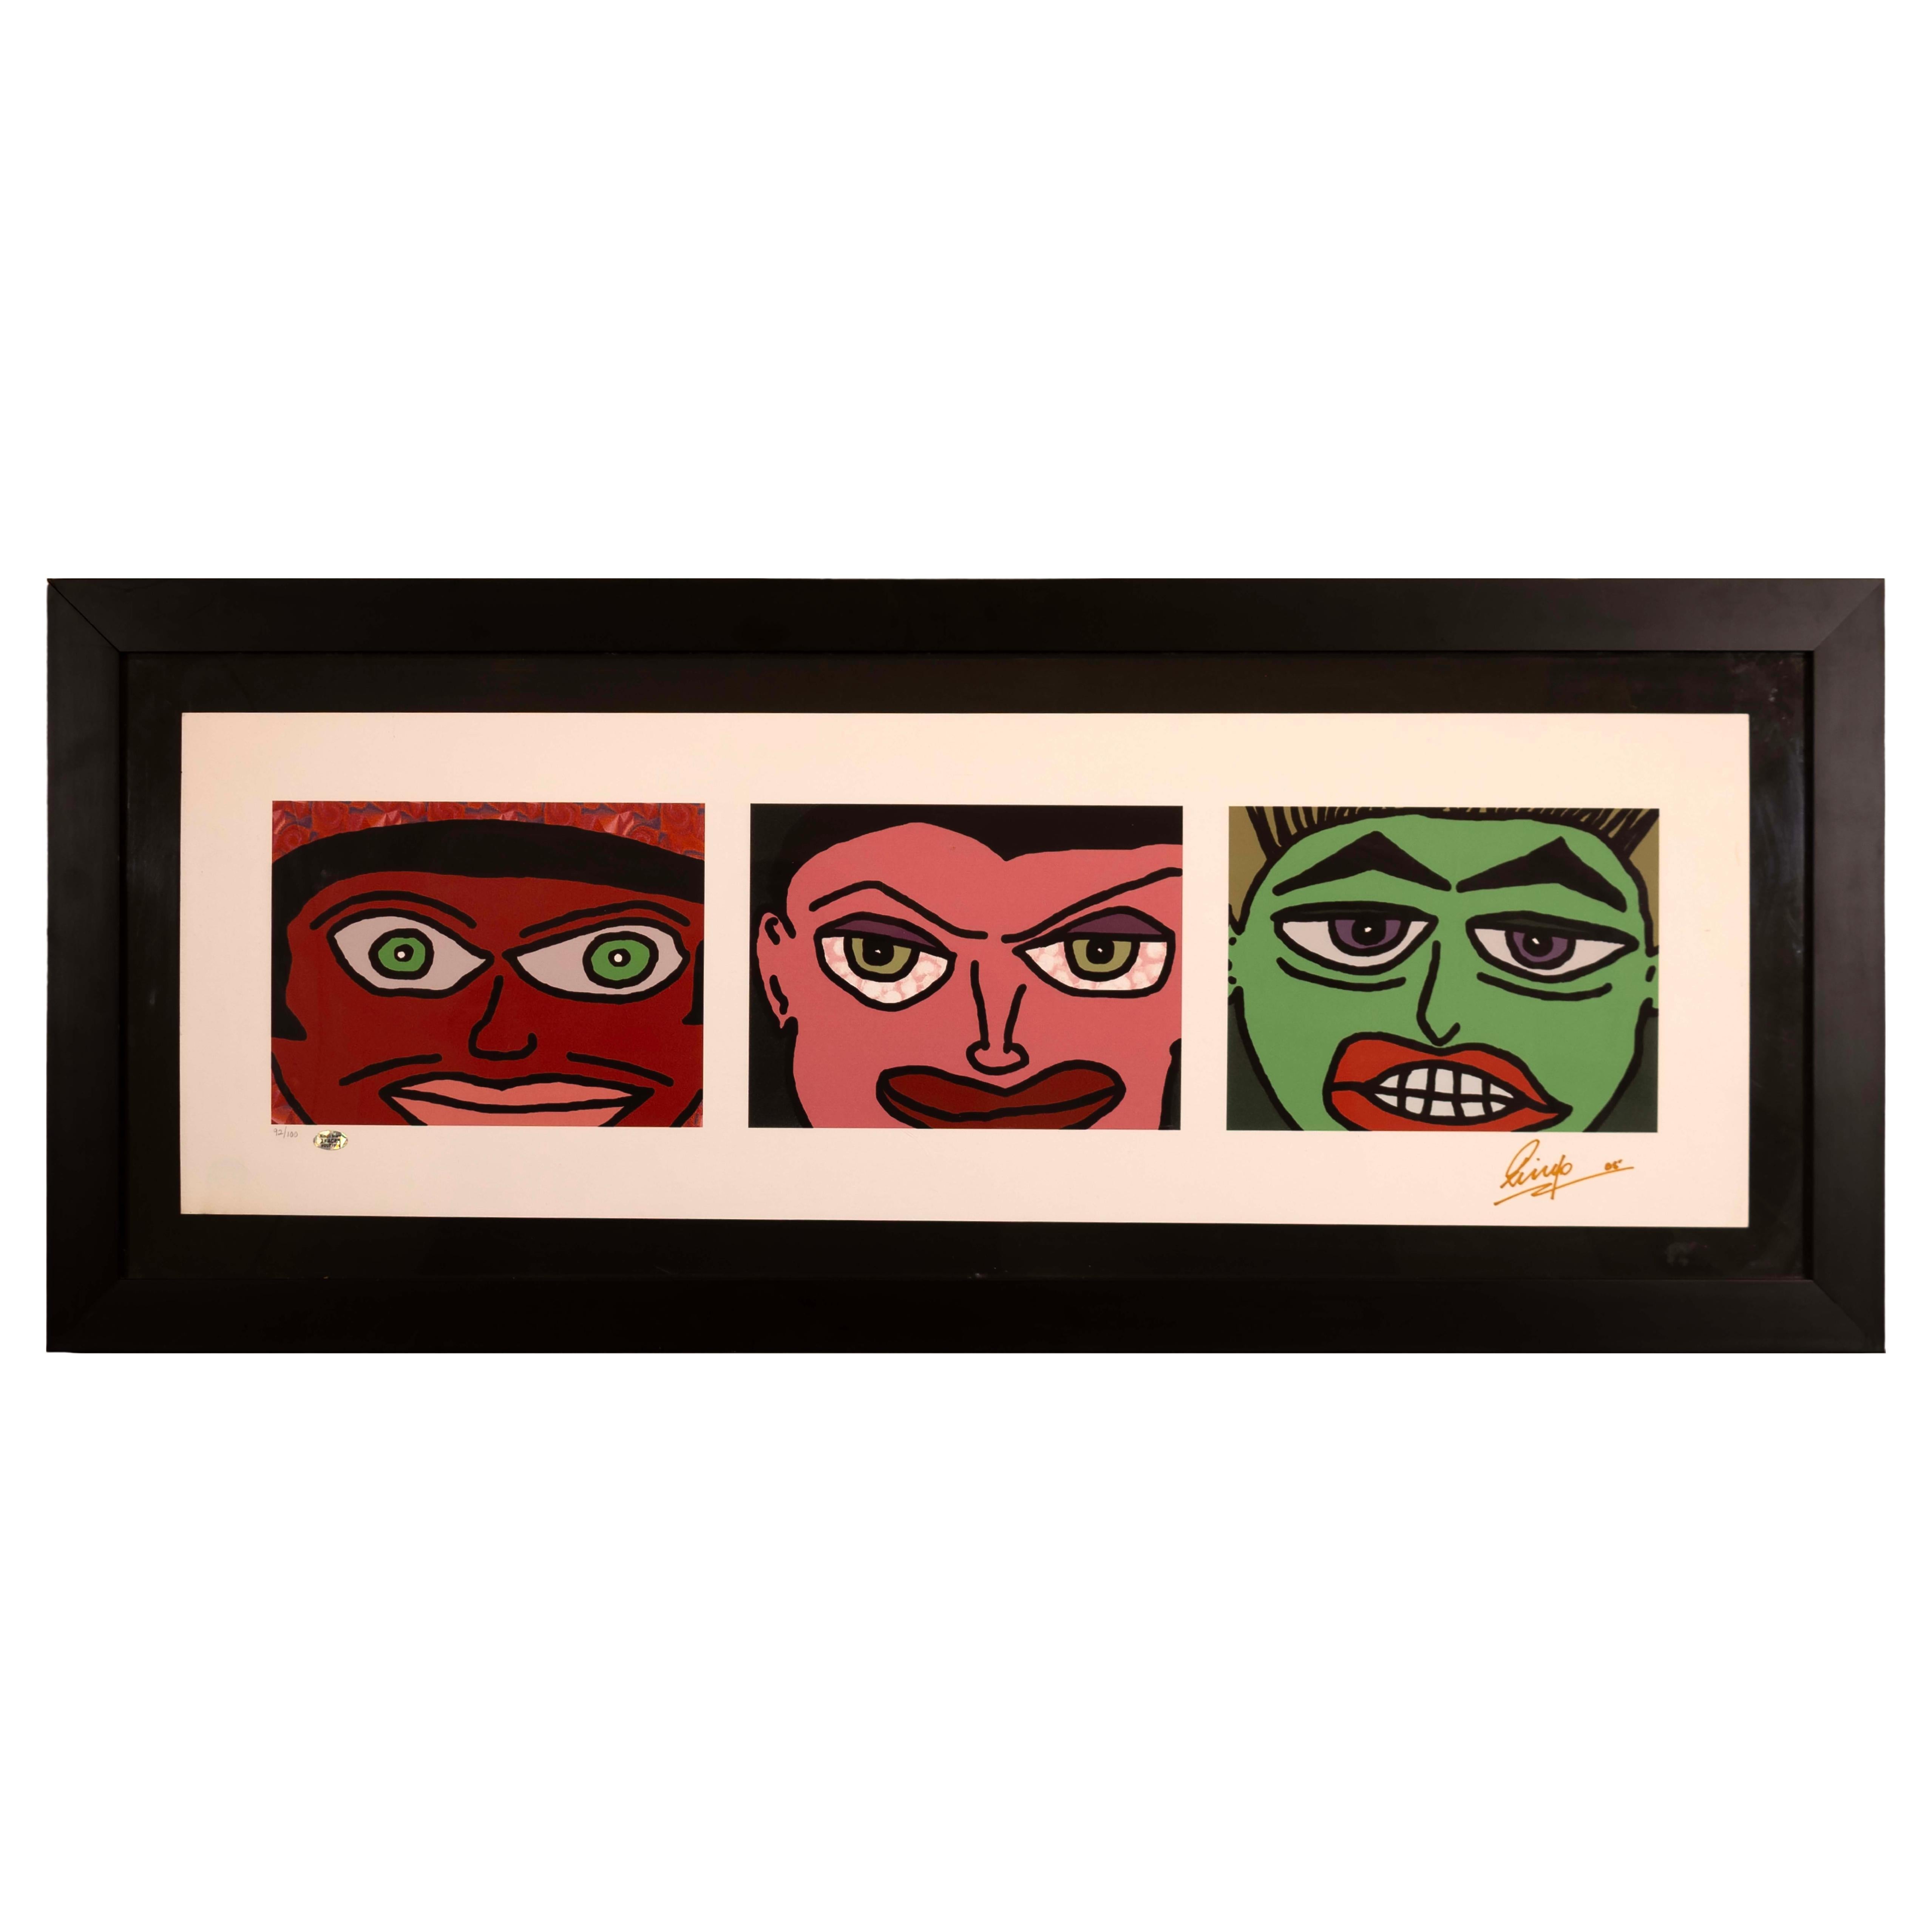 Ringo Starr 3 Faces Signed Contemporary Pop Art Serigraph on Paper 92/100 Framed